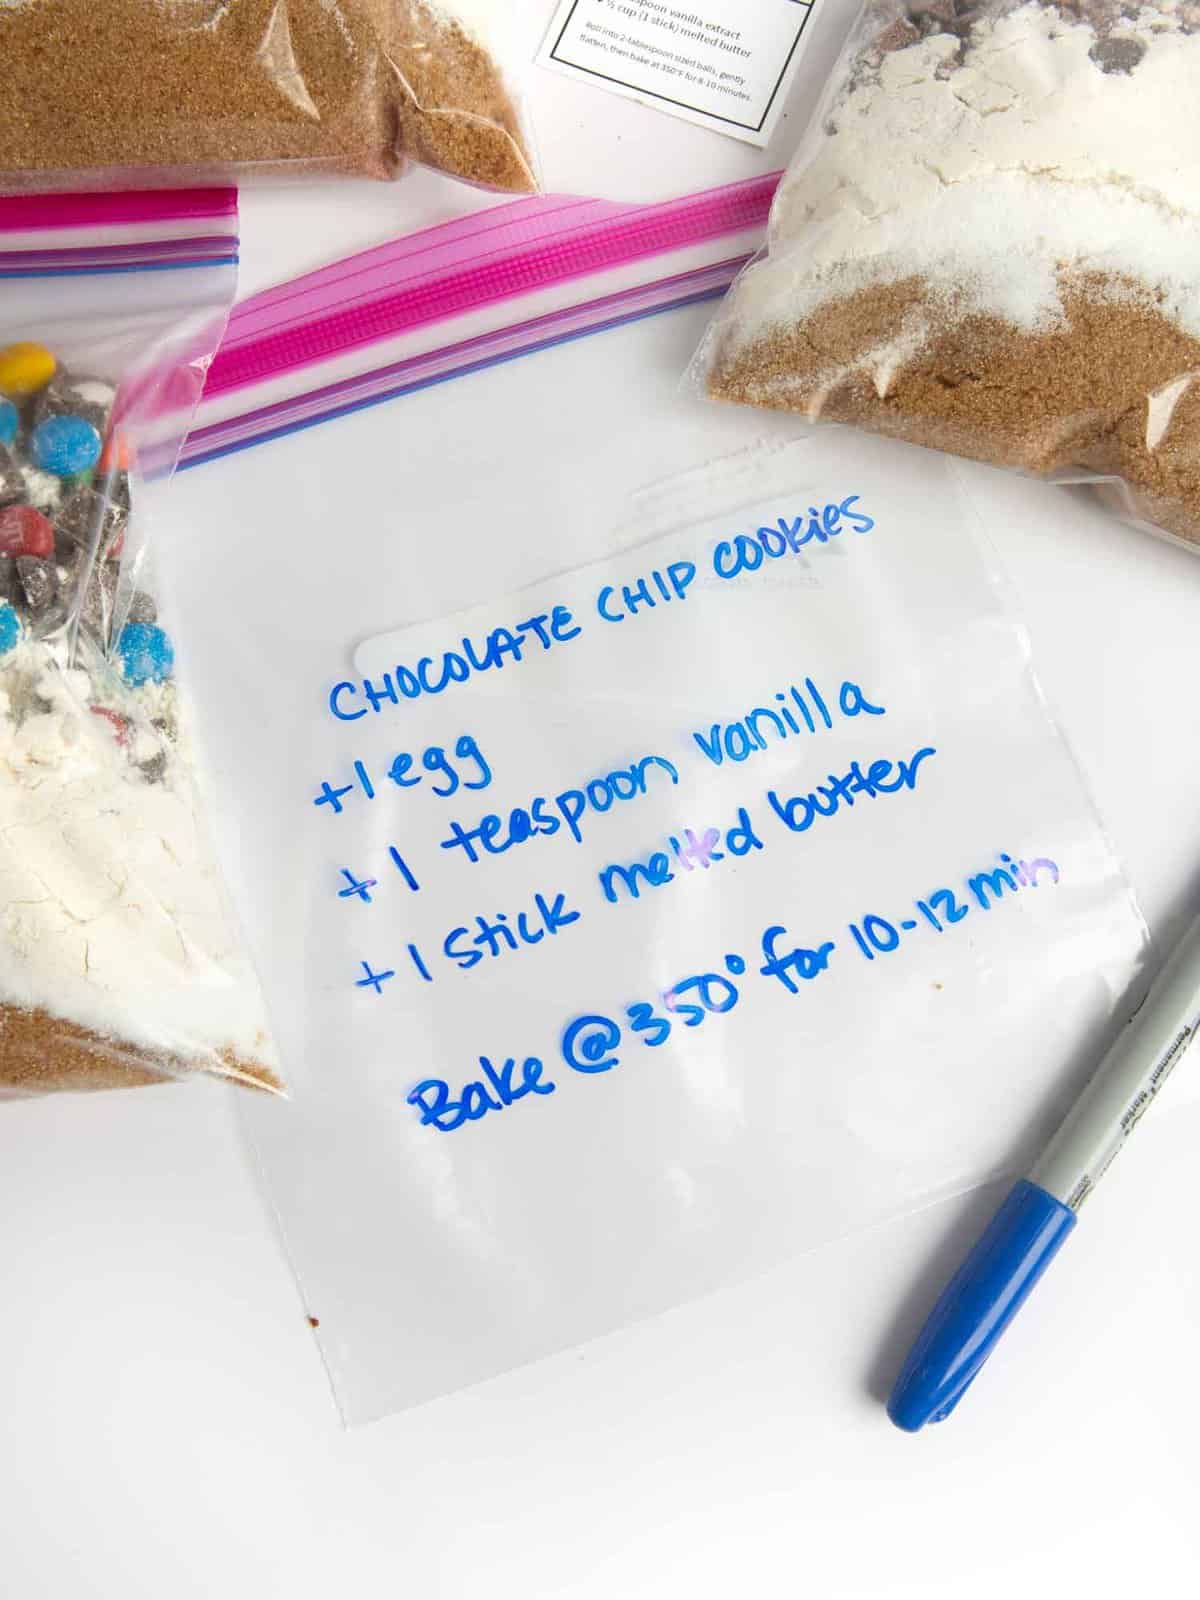 diy cookie mix in bag with instructions written on bag with permanent marker